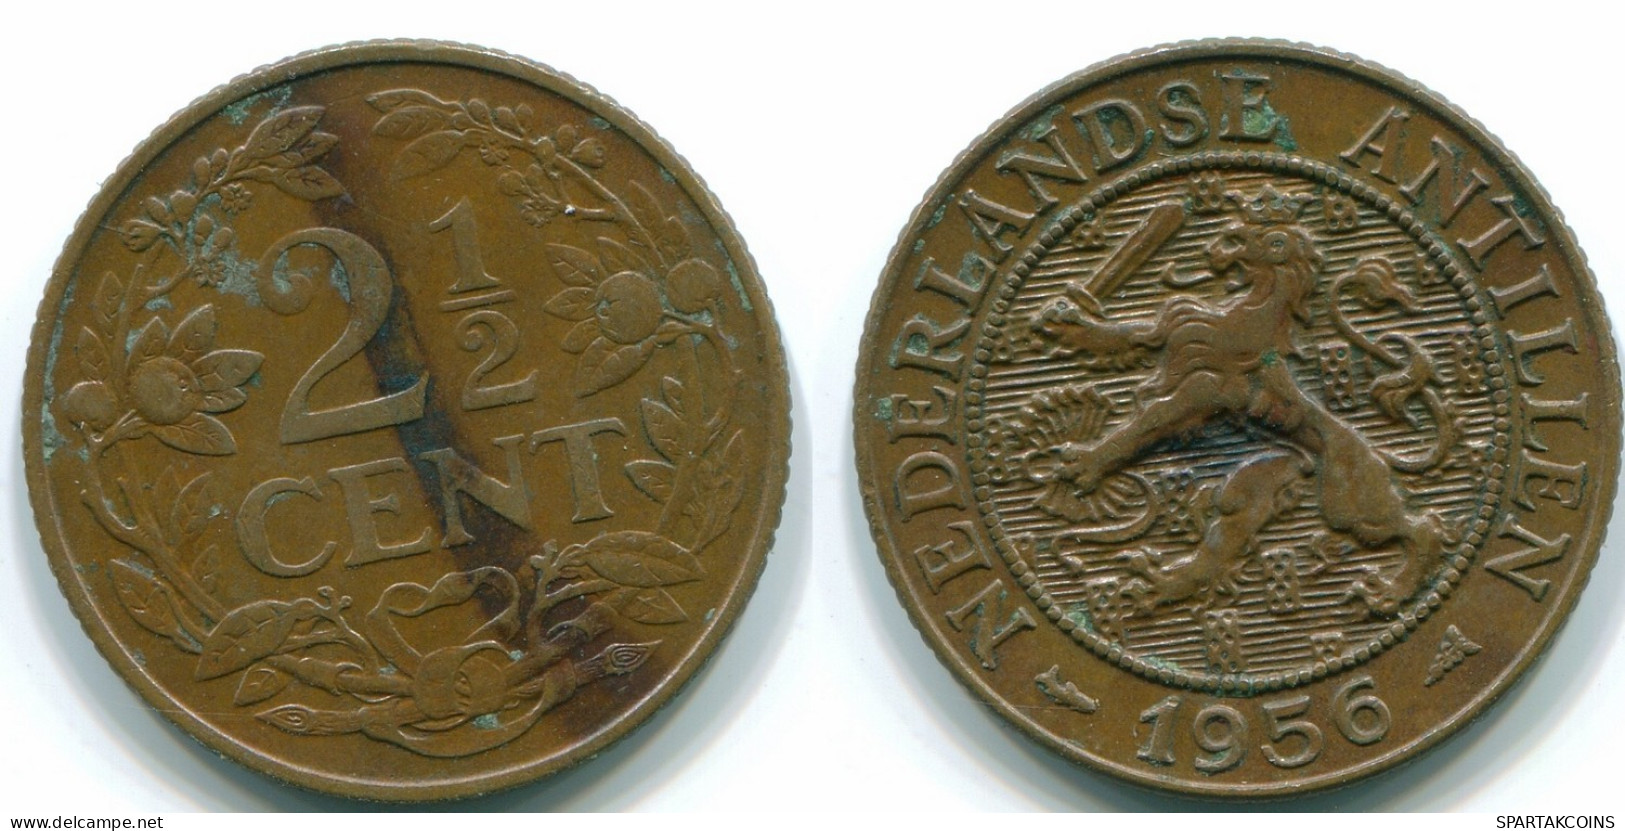 2 1/2 CENT 1956 CURACAO Netherlands Bronze Colonial Coin #S10167.U.A - Curacao